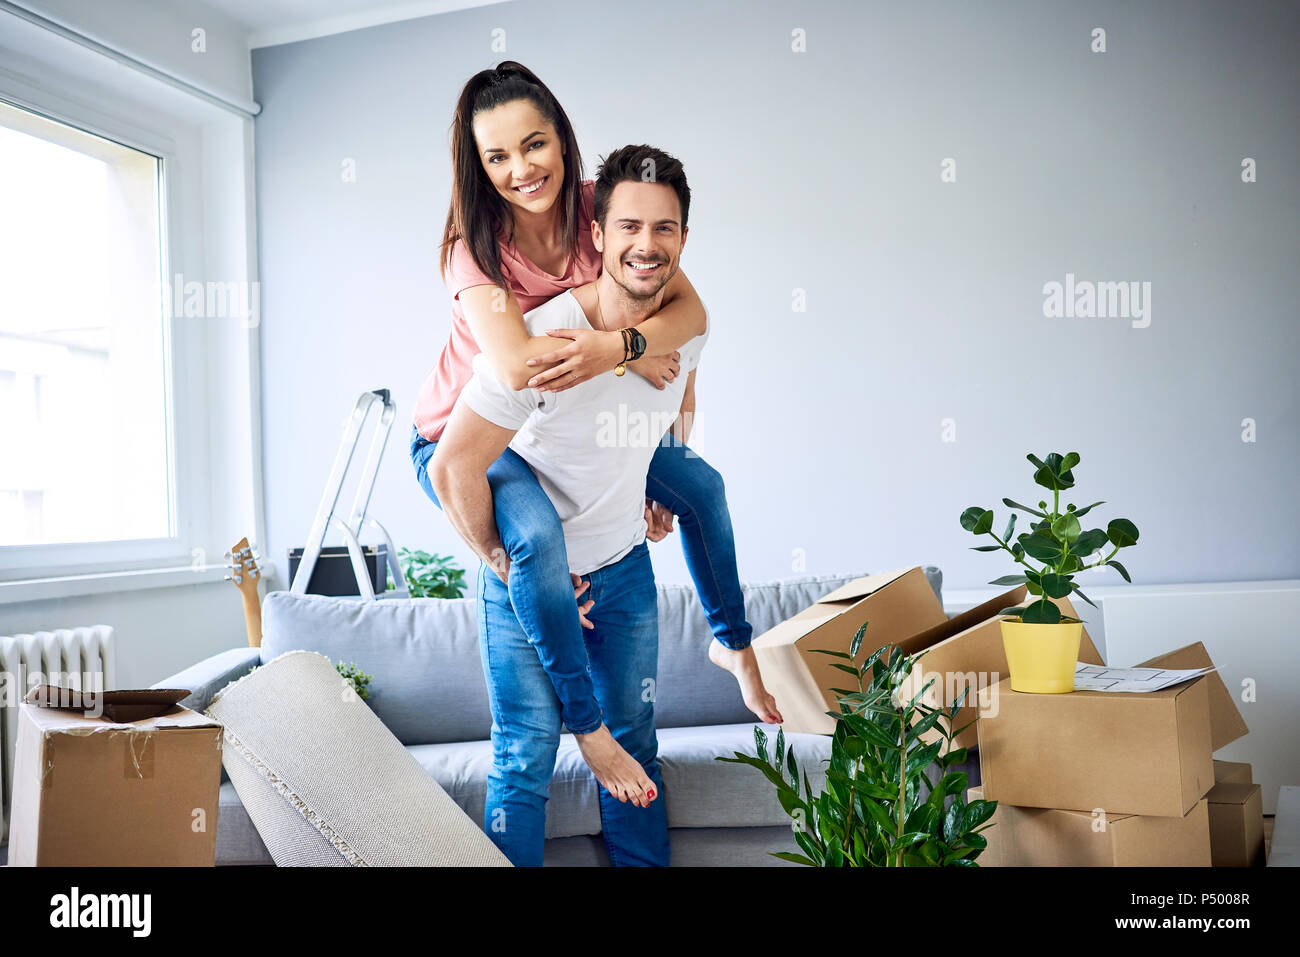 Portrait of cheerful couple moving in Stock Photo